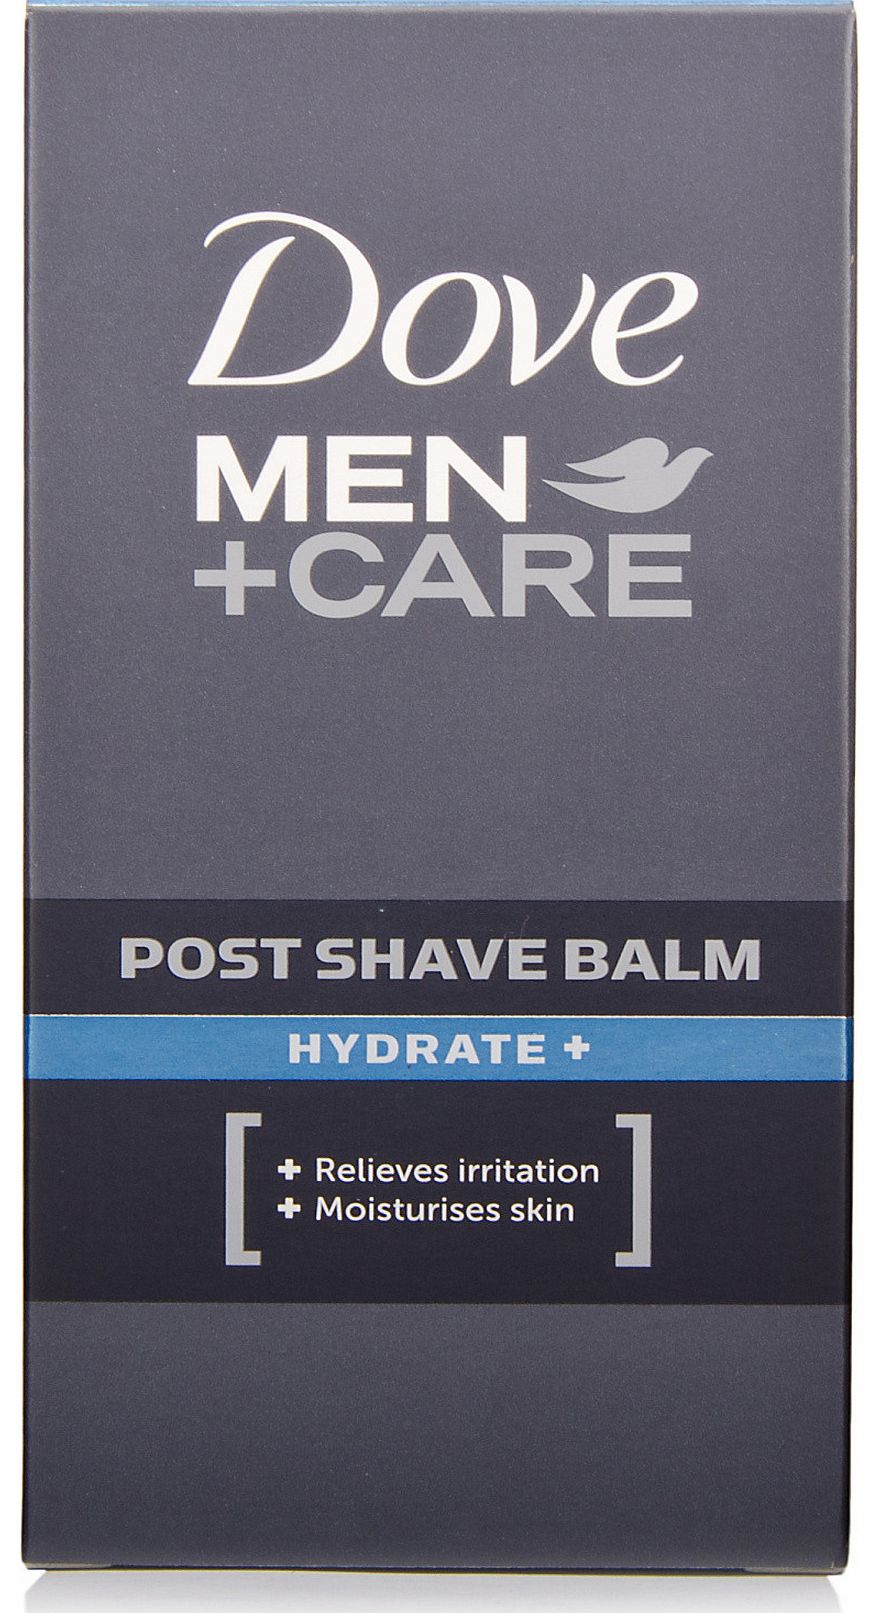 Men+Care Post Shave Balm Hydrate+